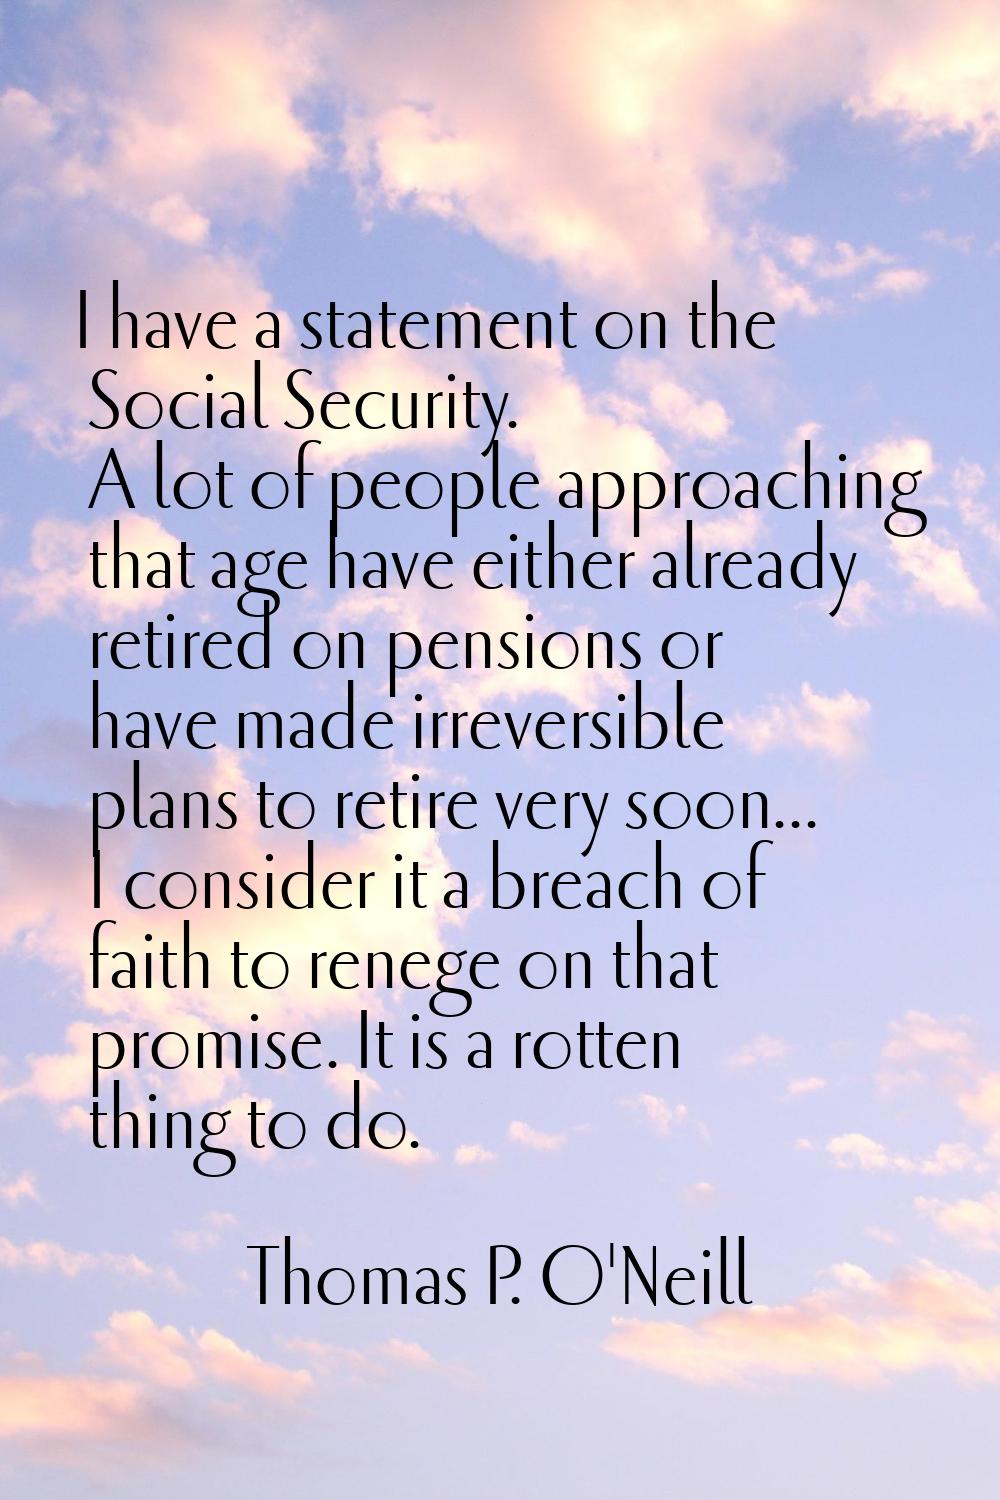 I have a statement on the Social Security. A lot of people approaching that age have either already